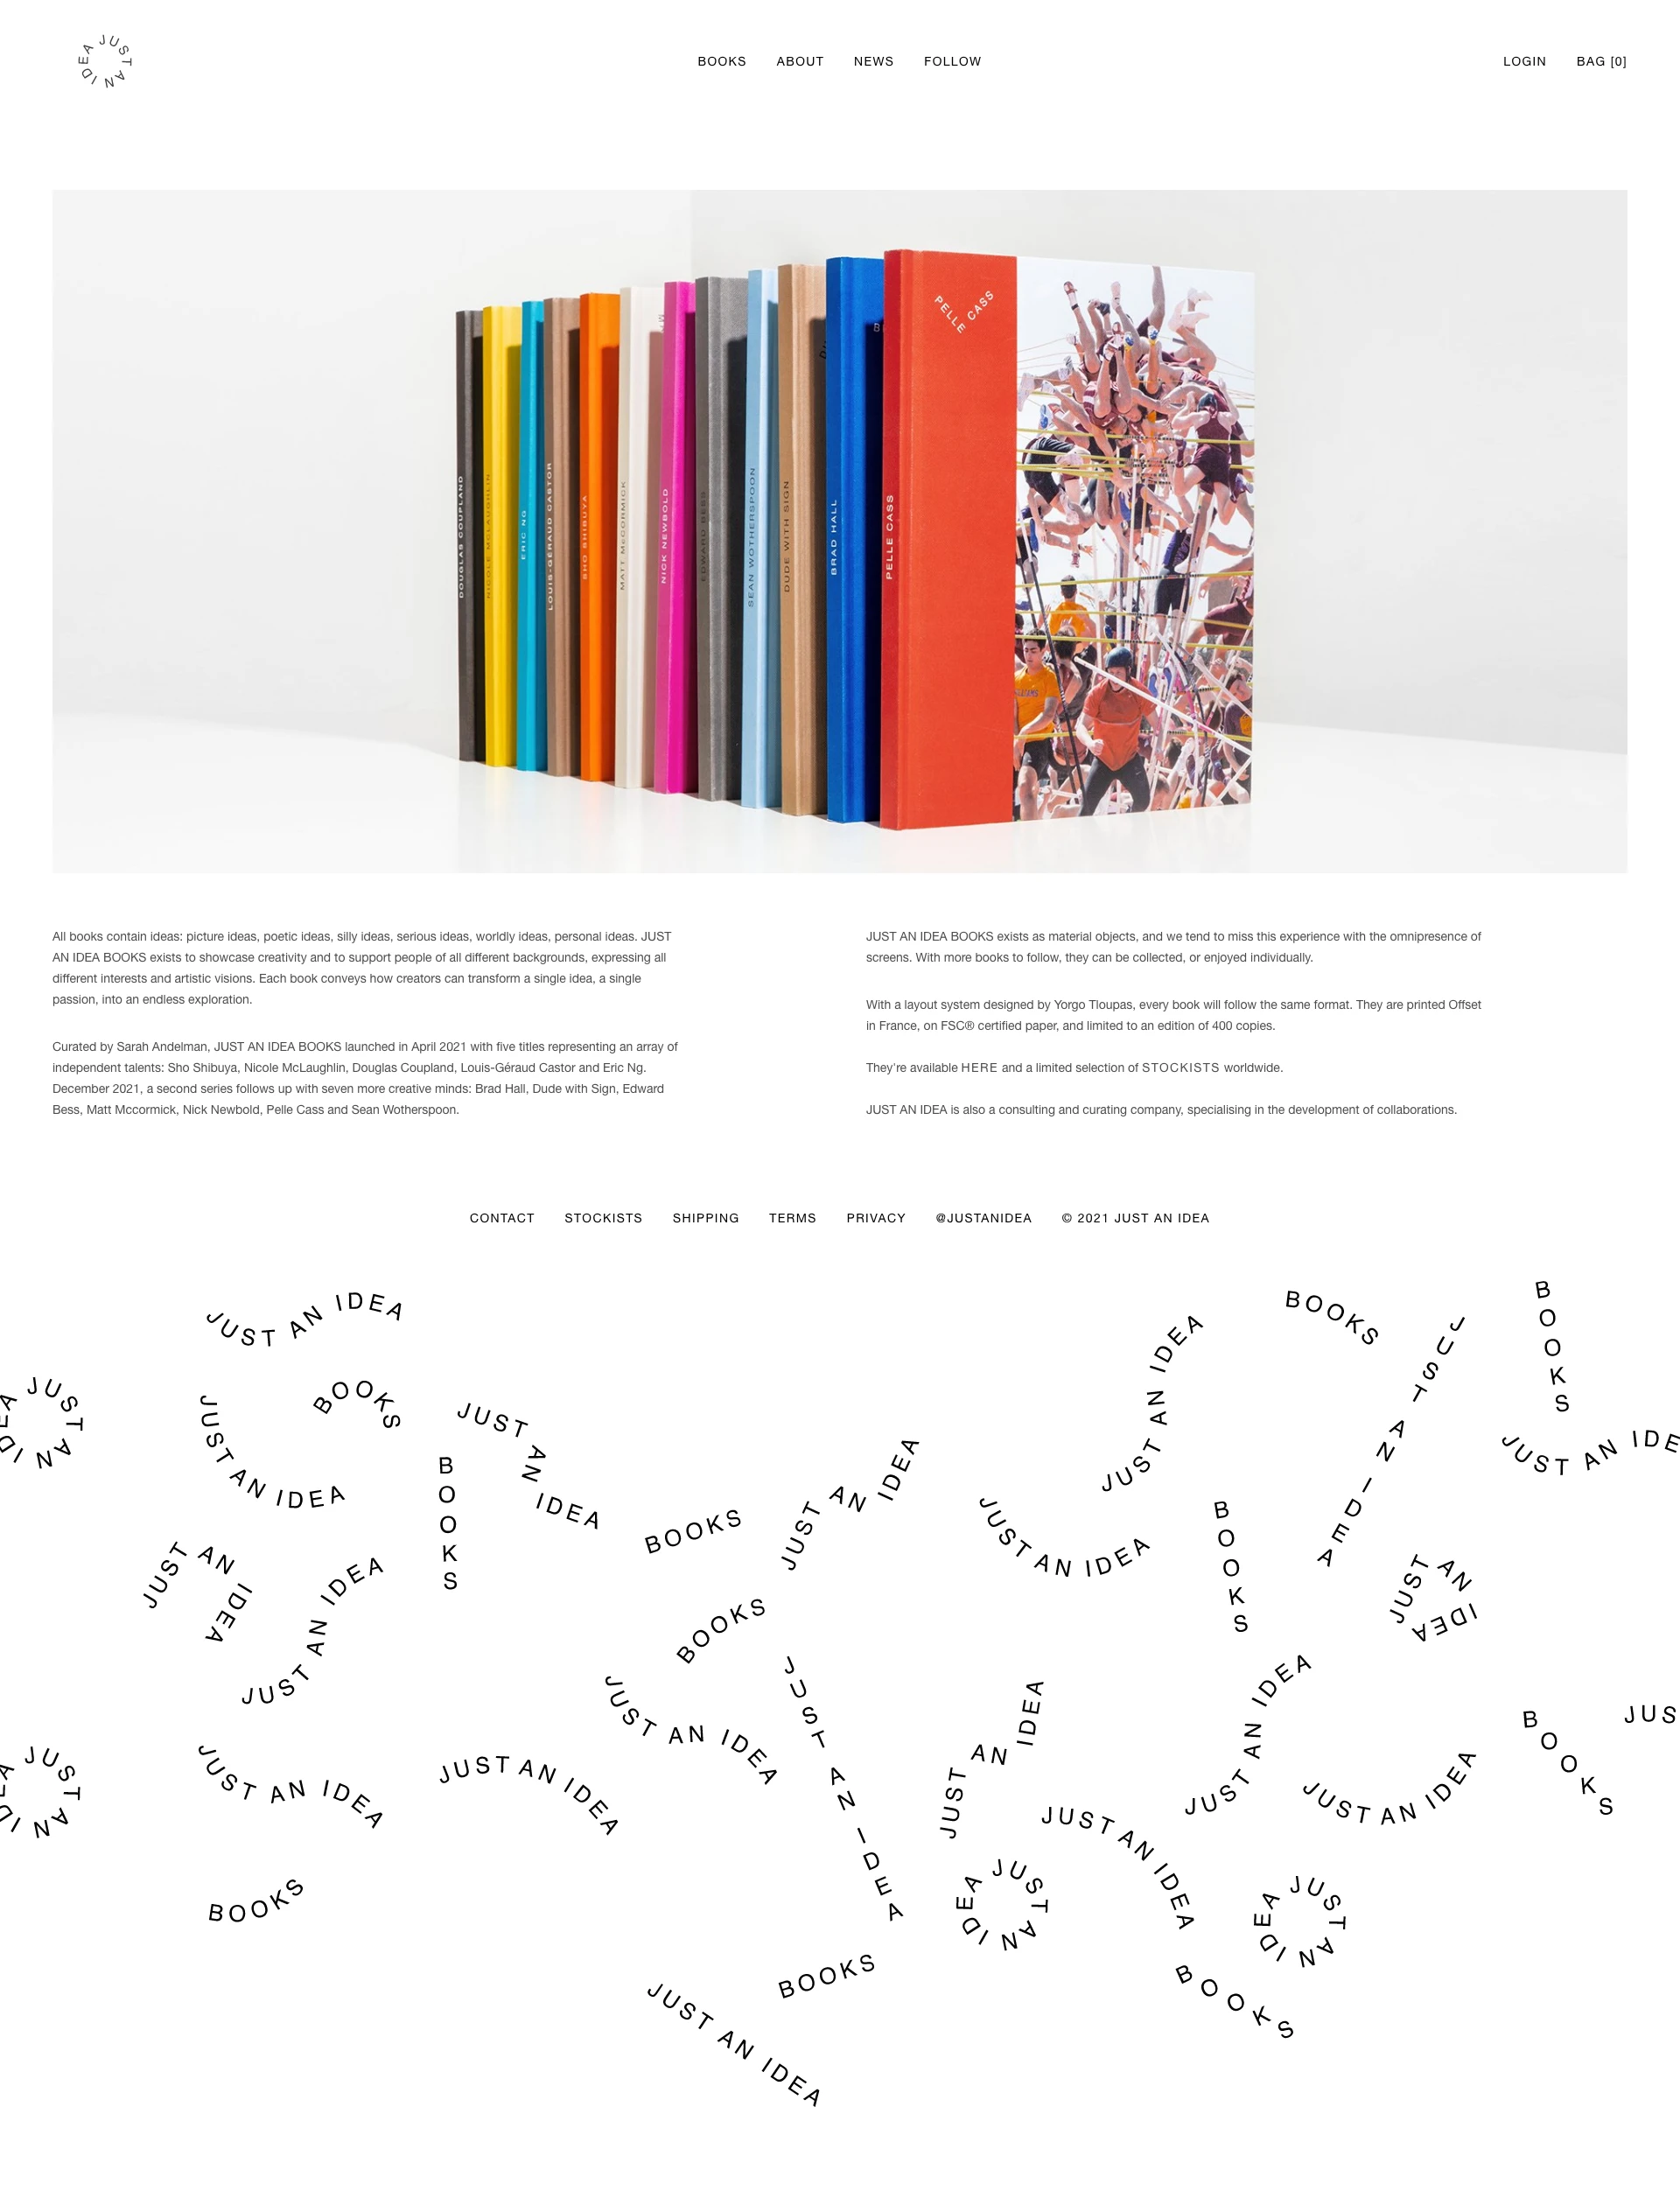 JUST AN IDEA Landing Page Example: A collection of books. A tribute to imagination. So Shibuya, Nicole Mclaughlin, Douglas Coupland, Eric Ng, Louis Géraud-Castor.